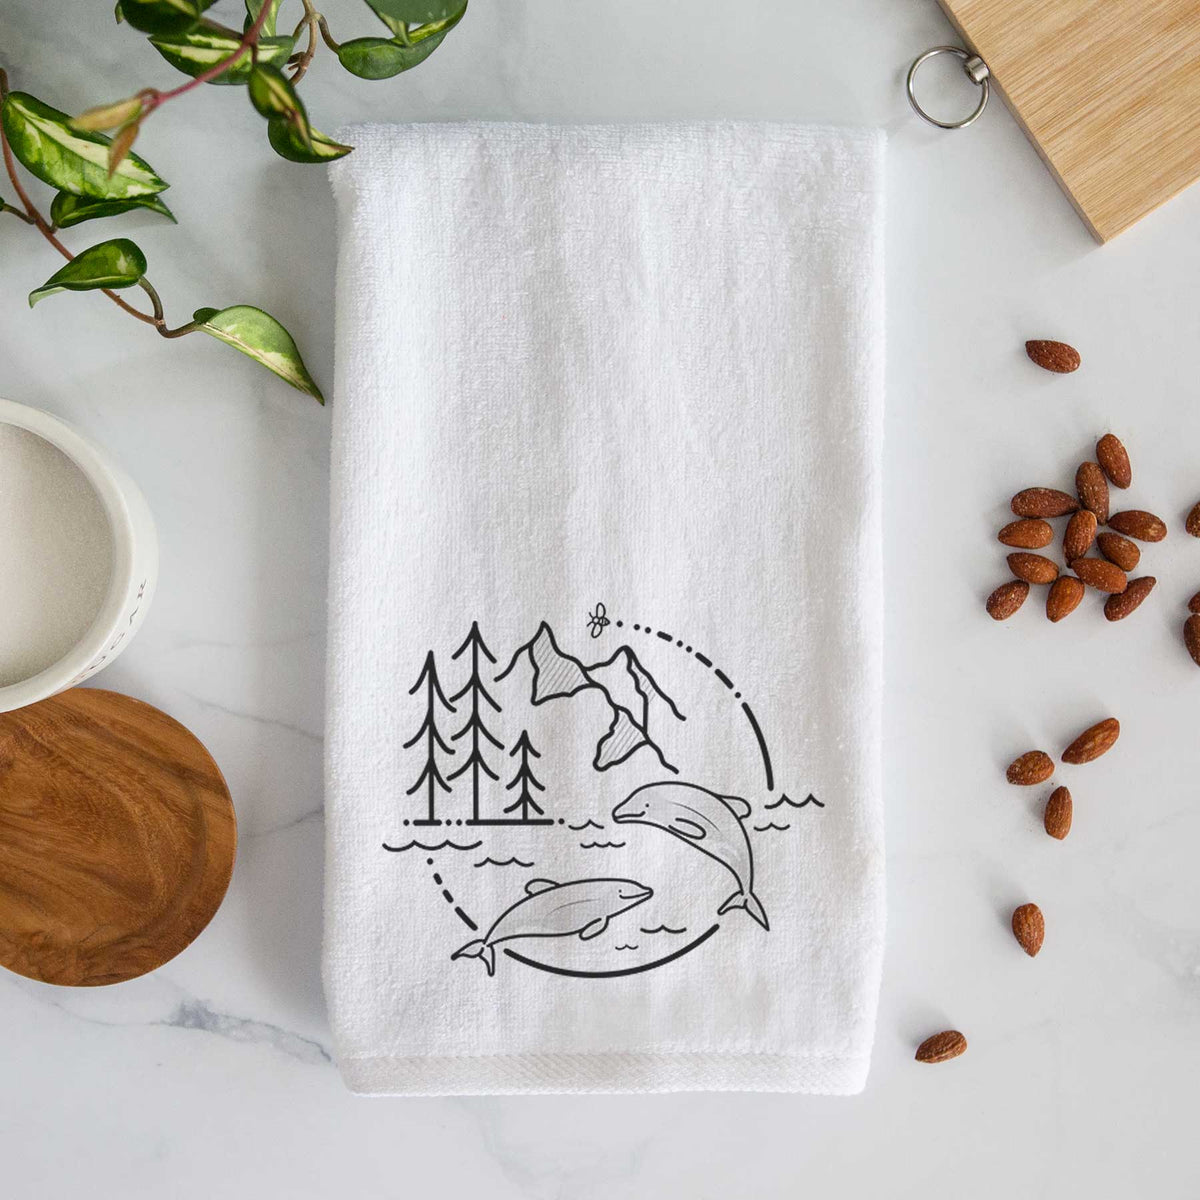 It&#39;s All Connected - Maui Dolphins Hand Towel